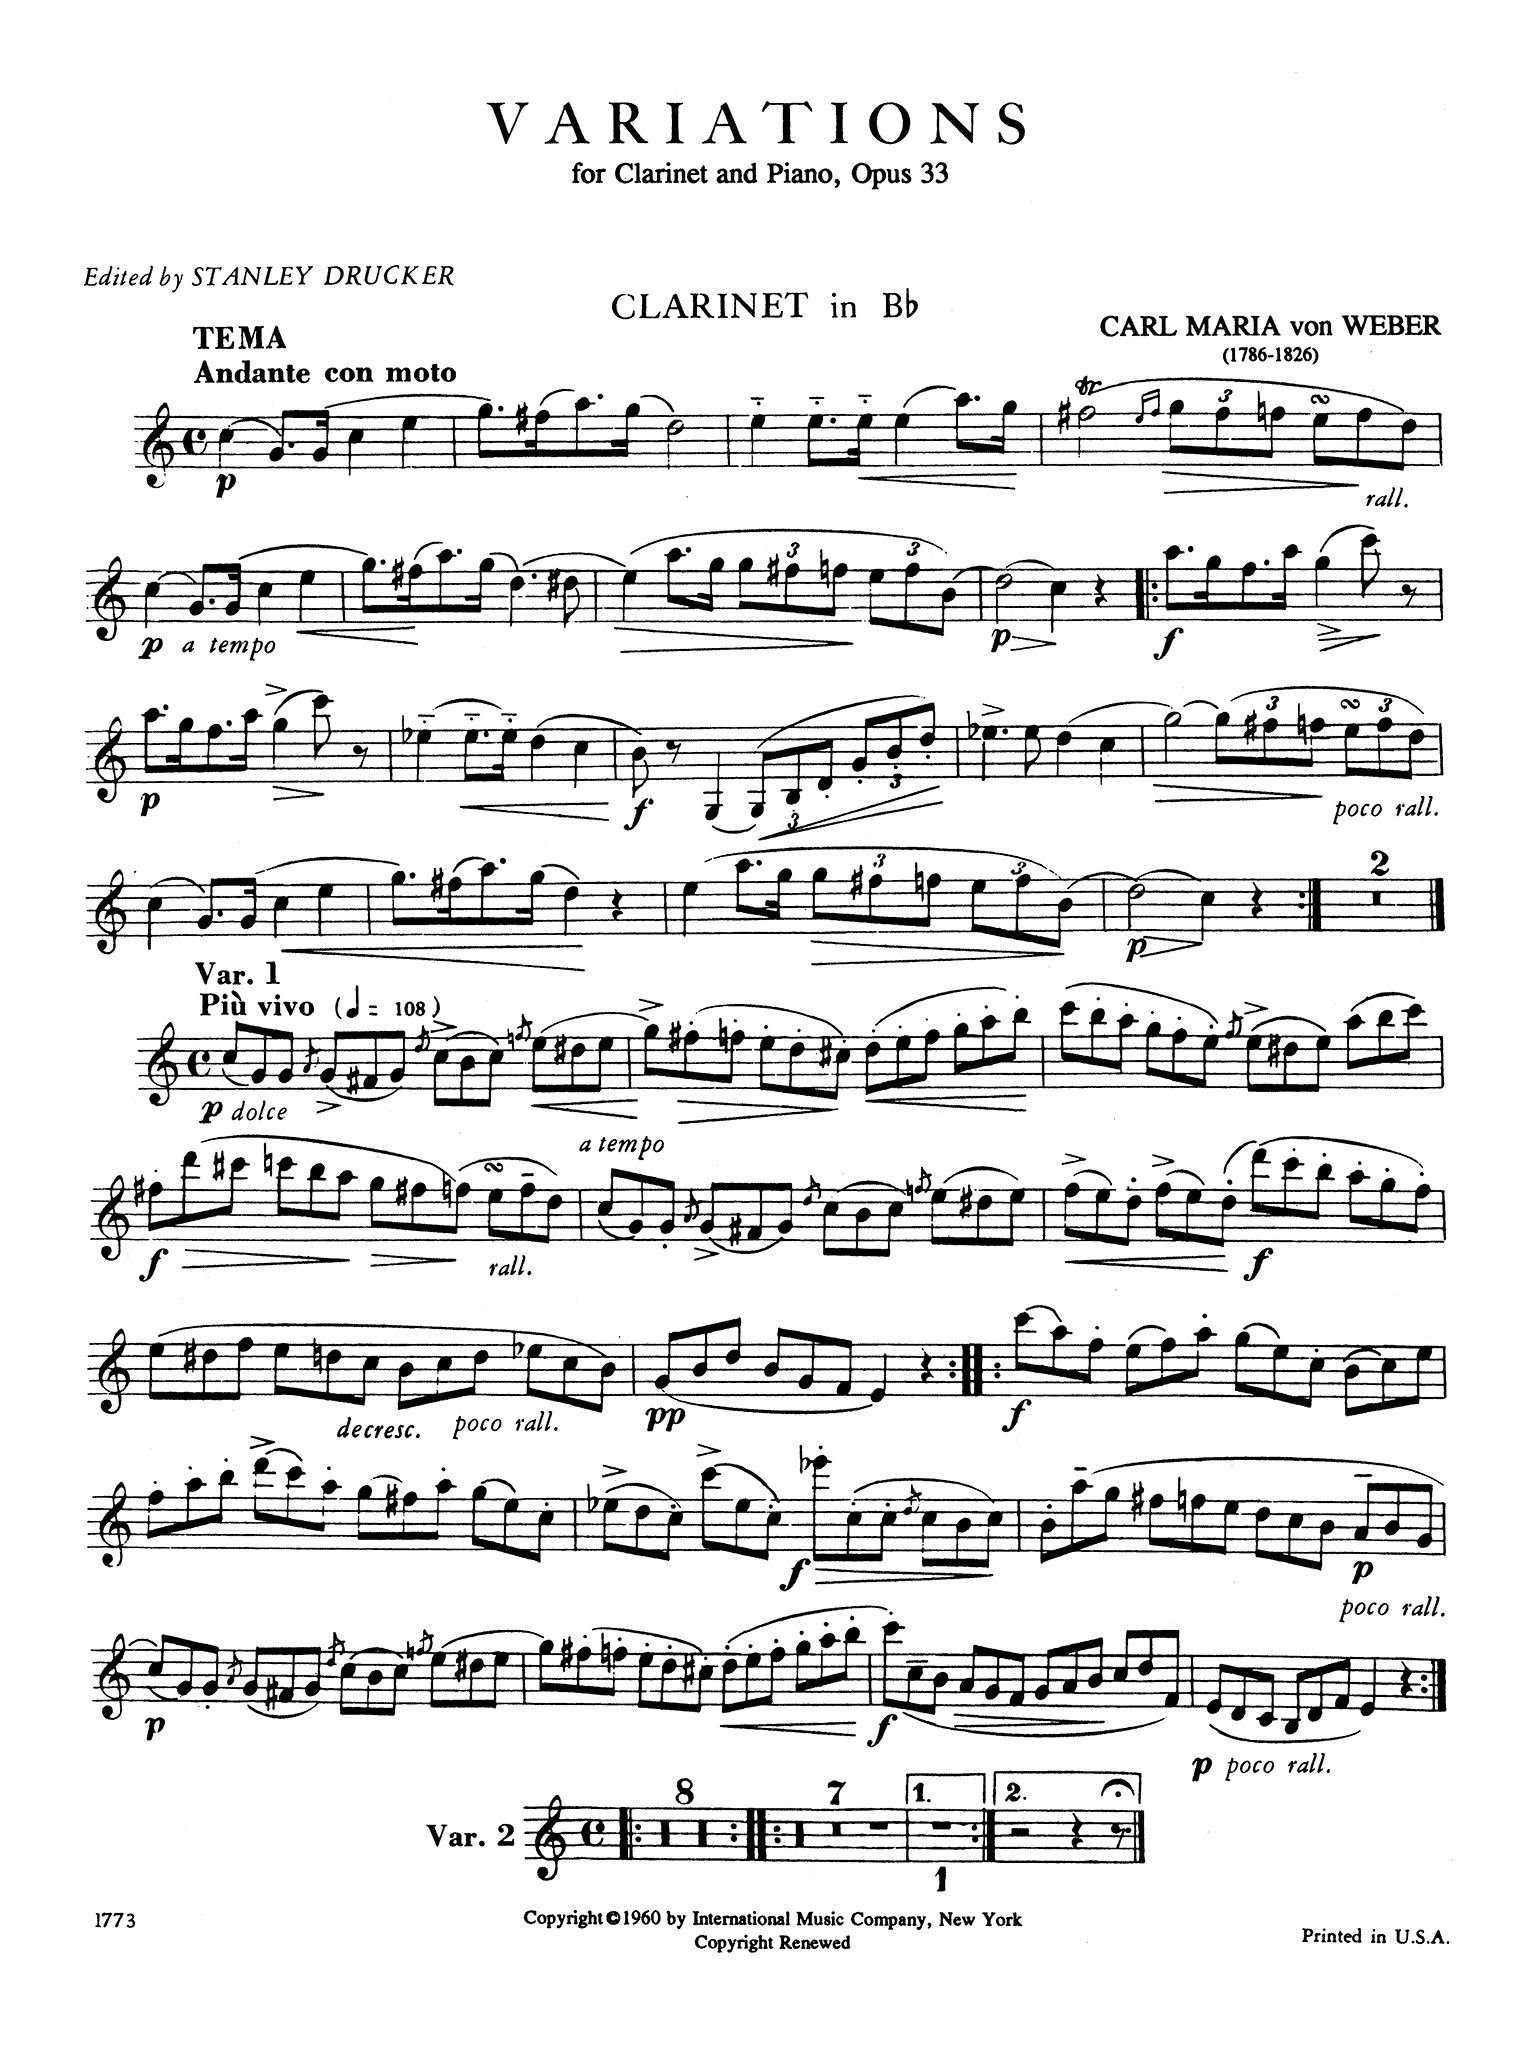 Variations on a theme from Silvana, Op. 33, J. 128 Clarinet part